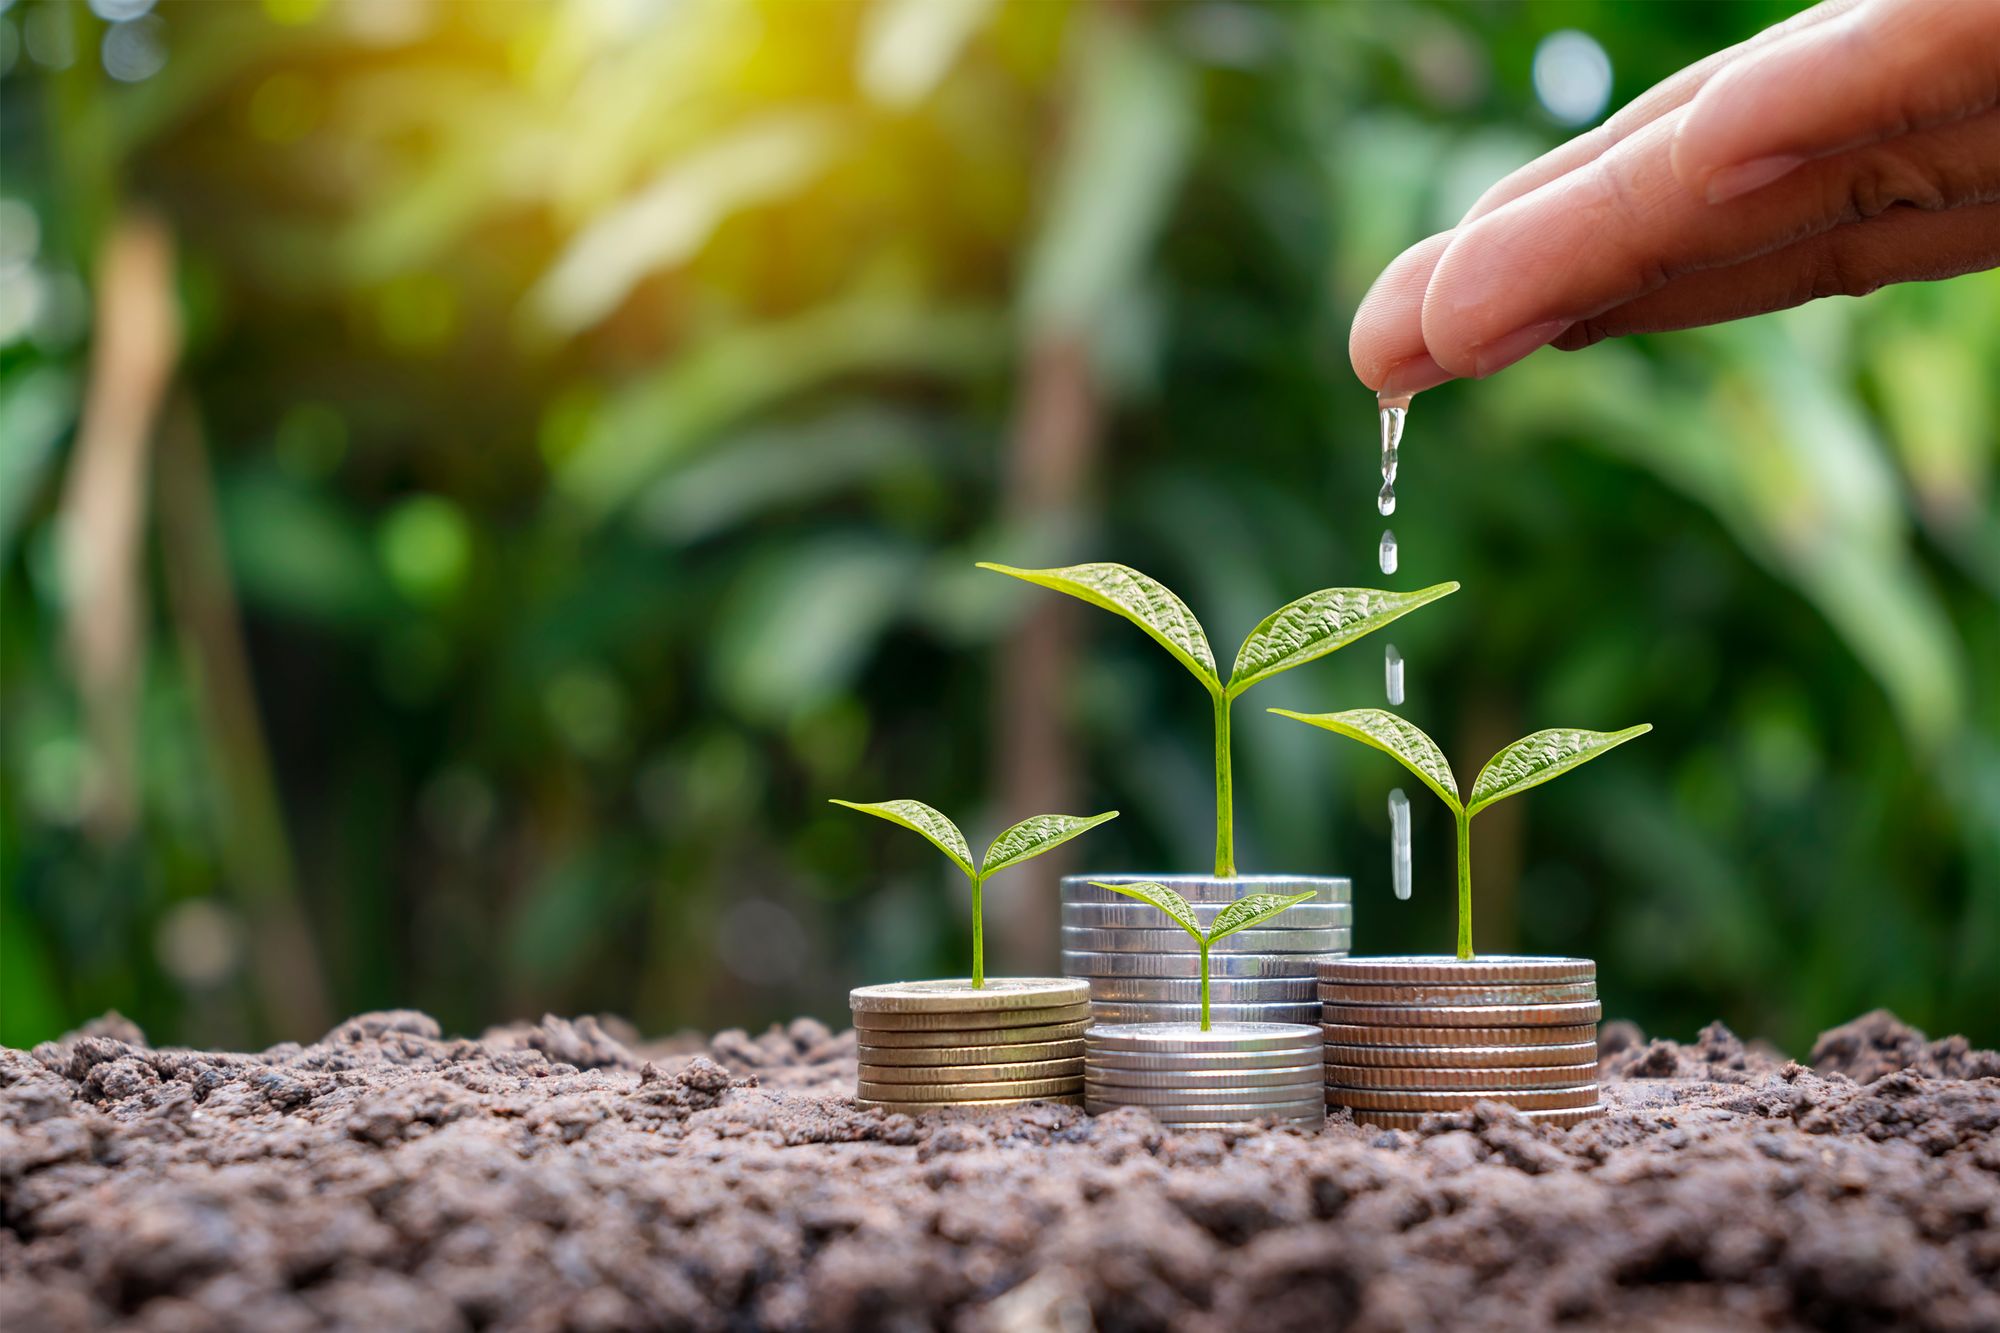 hands-are-watering-growing-plants-coins-amid-blurred-green-nature-background-financial-concept